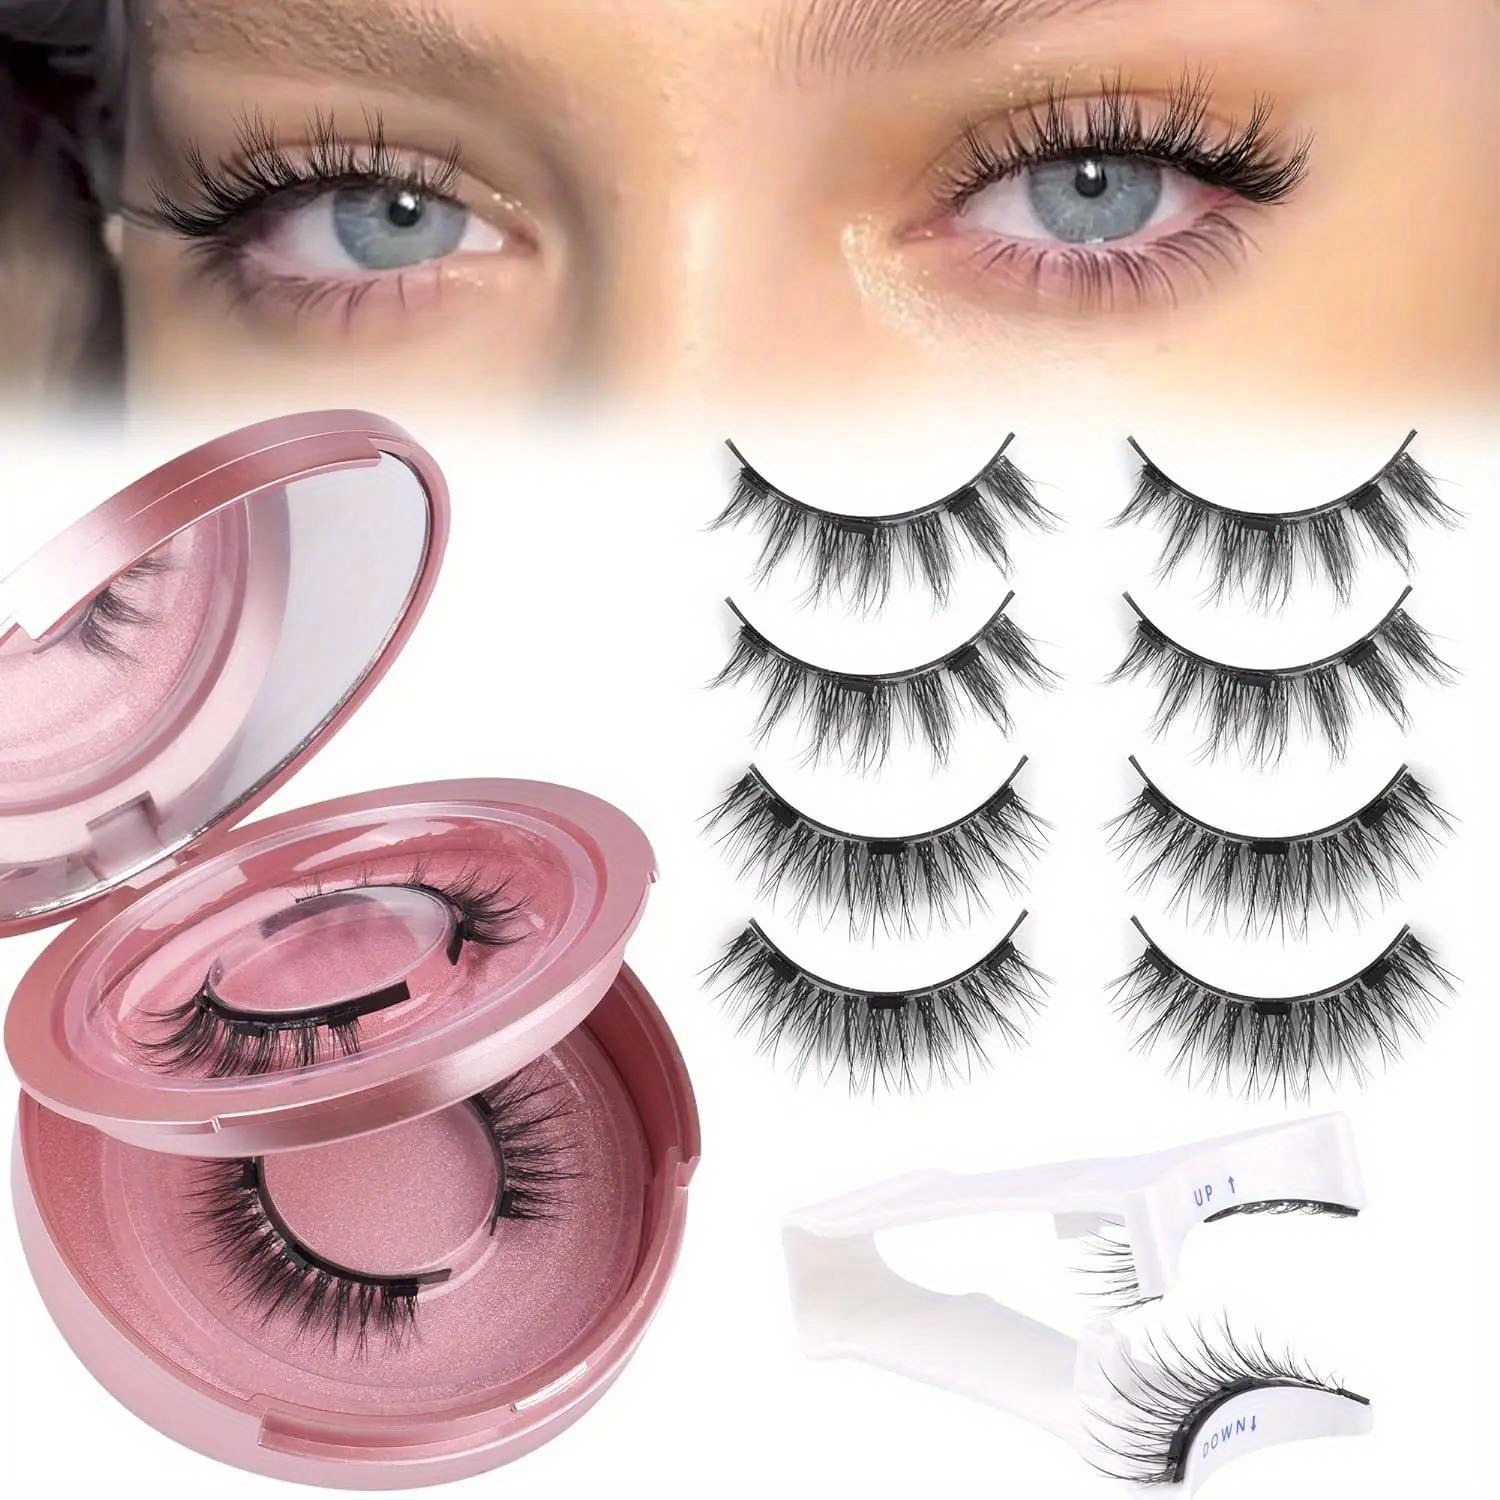 

Easy-to-apply Magnetic Eyelashes Kit With Applicator - Reusable, Doll Eye Style False Lashes In 10-12mm Lengths For Beginners